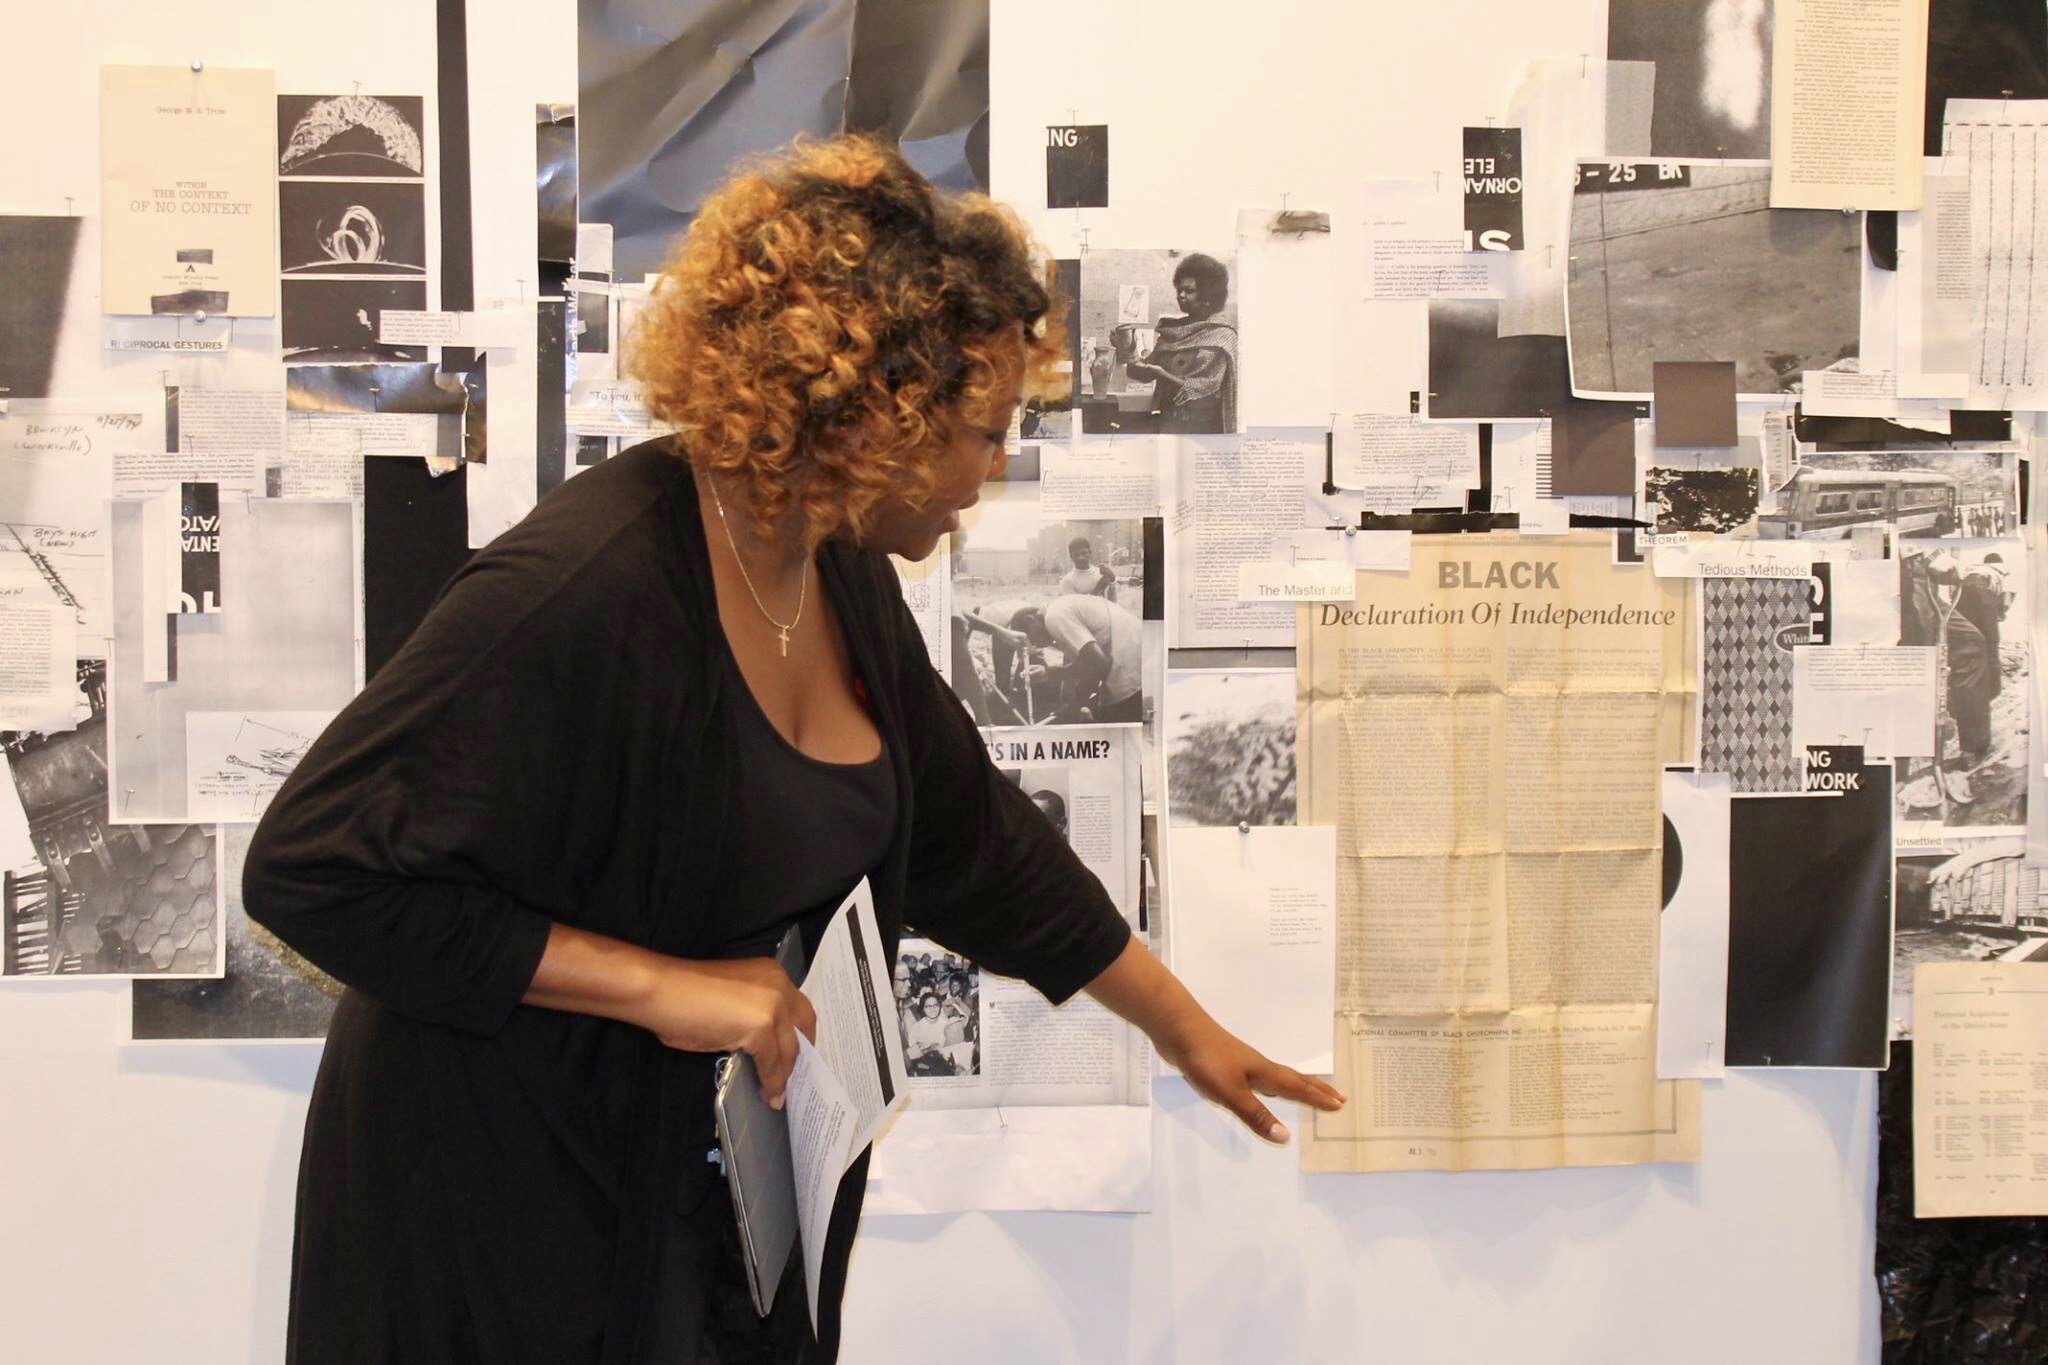 Noel Corbin, leading a guided tour of Kameelah Rasheed’s 2015 Future Perfect exhibition at Weeksville Heritage Center in Brooklyn, New York.